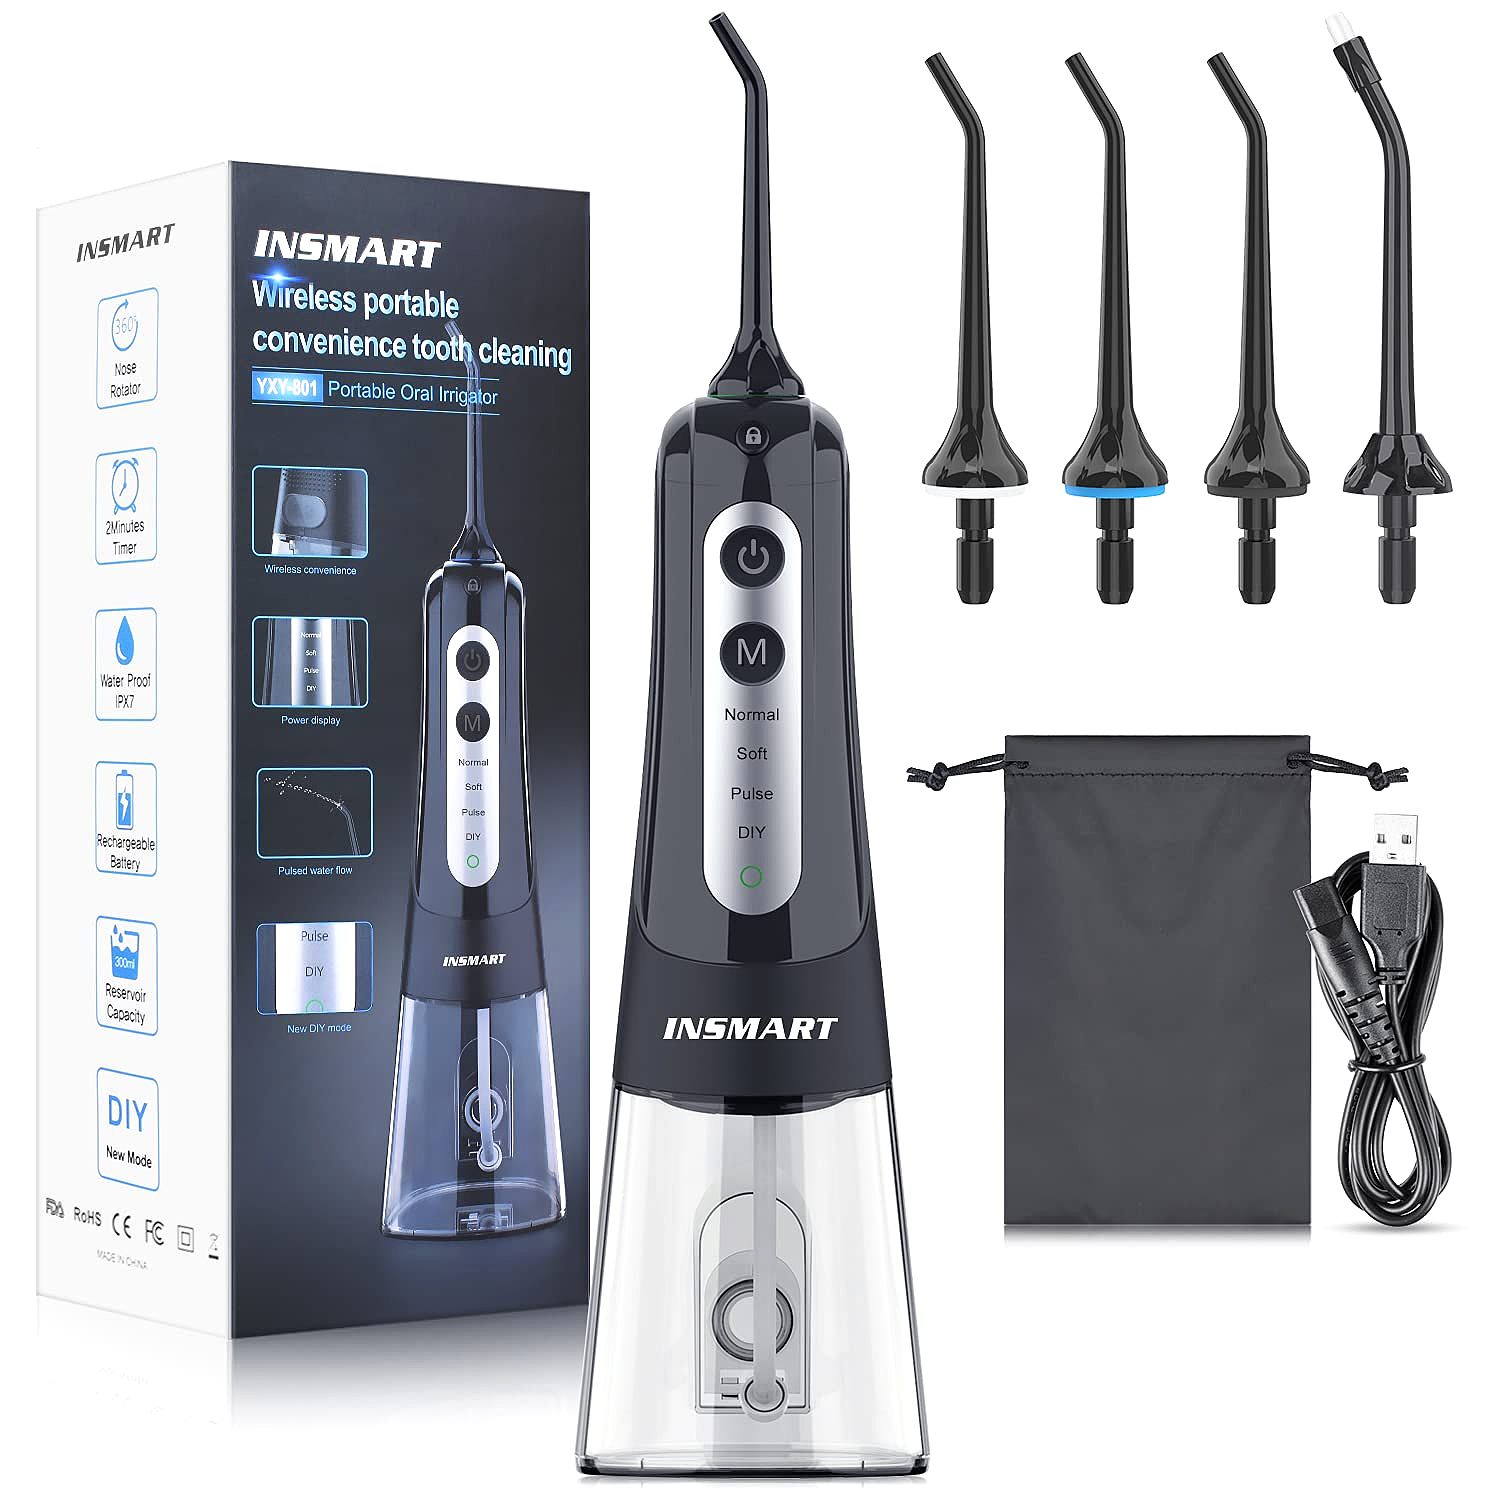 INSMART FC256 Cordless Water Flosser: A Must-Have for Oral Hygiene